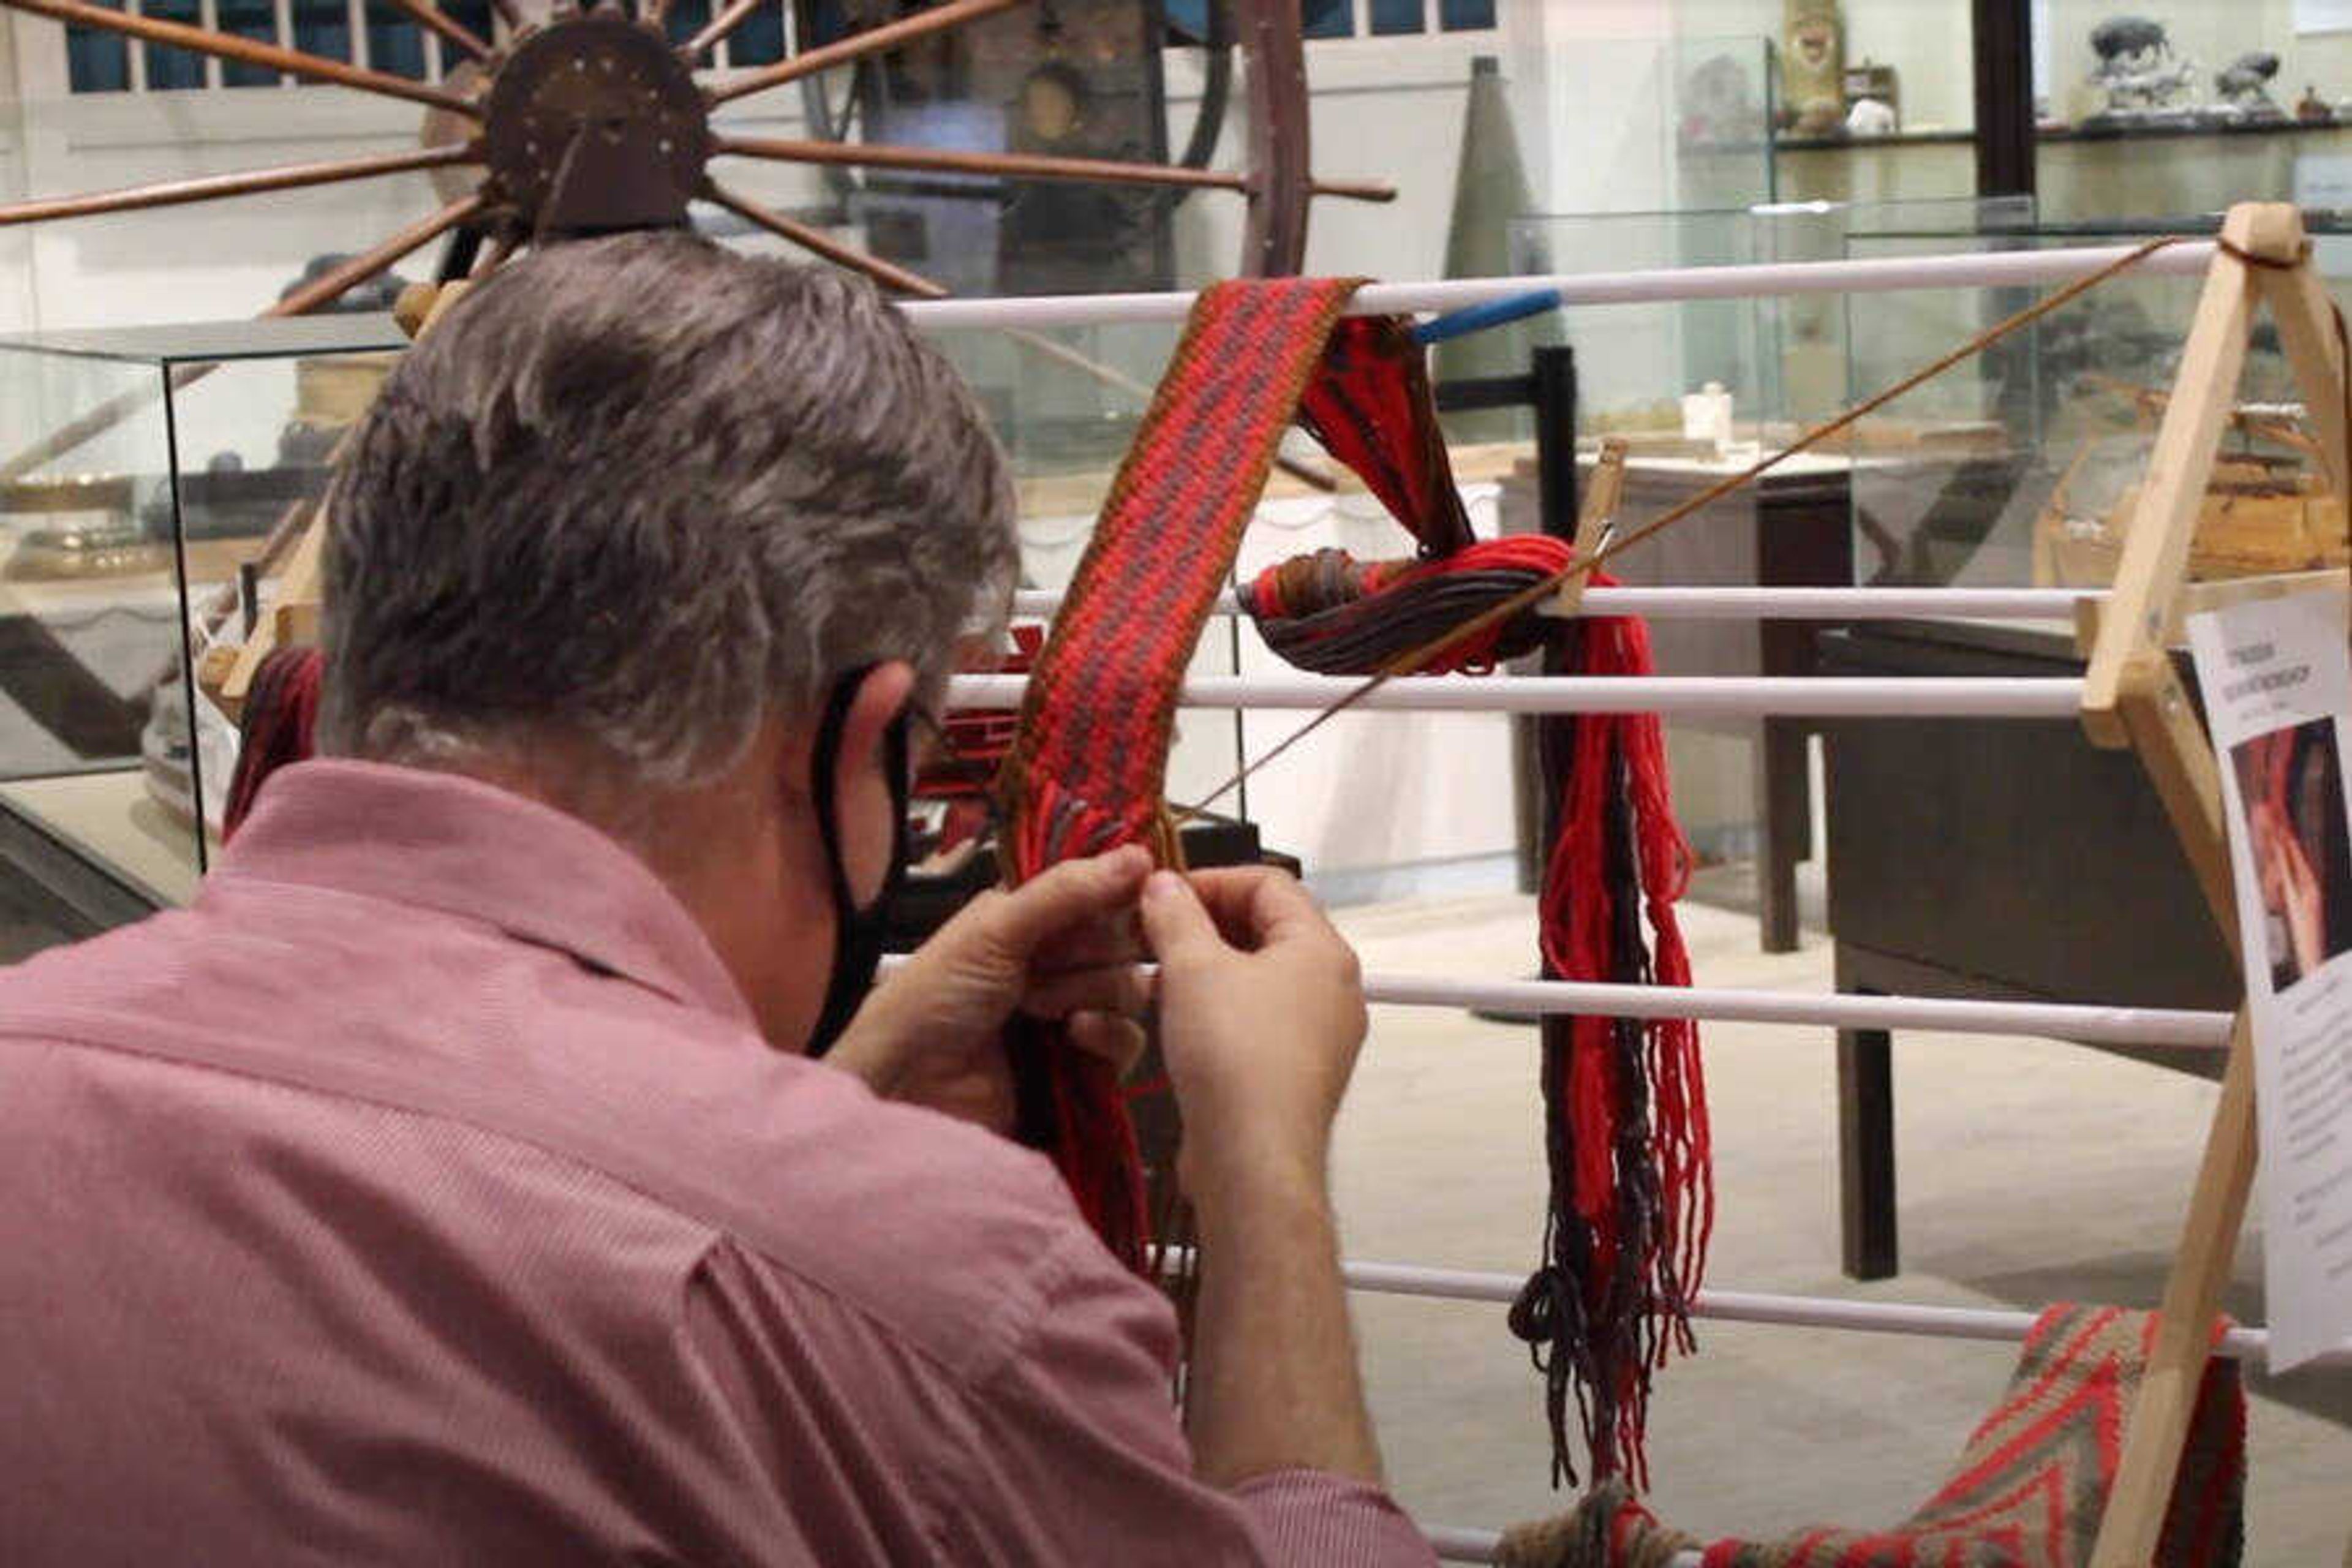 Crisp Museum Manager Jim Phillips weaves fabric in a demonstration, as a part of the Night at the Museum event held on Aug. 29.